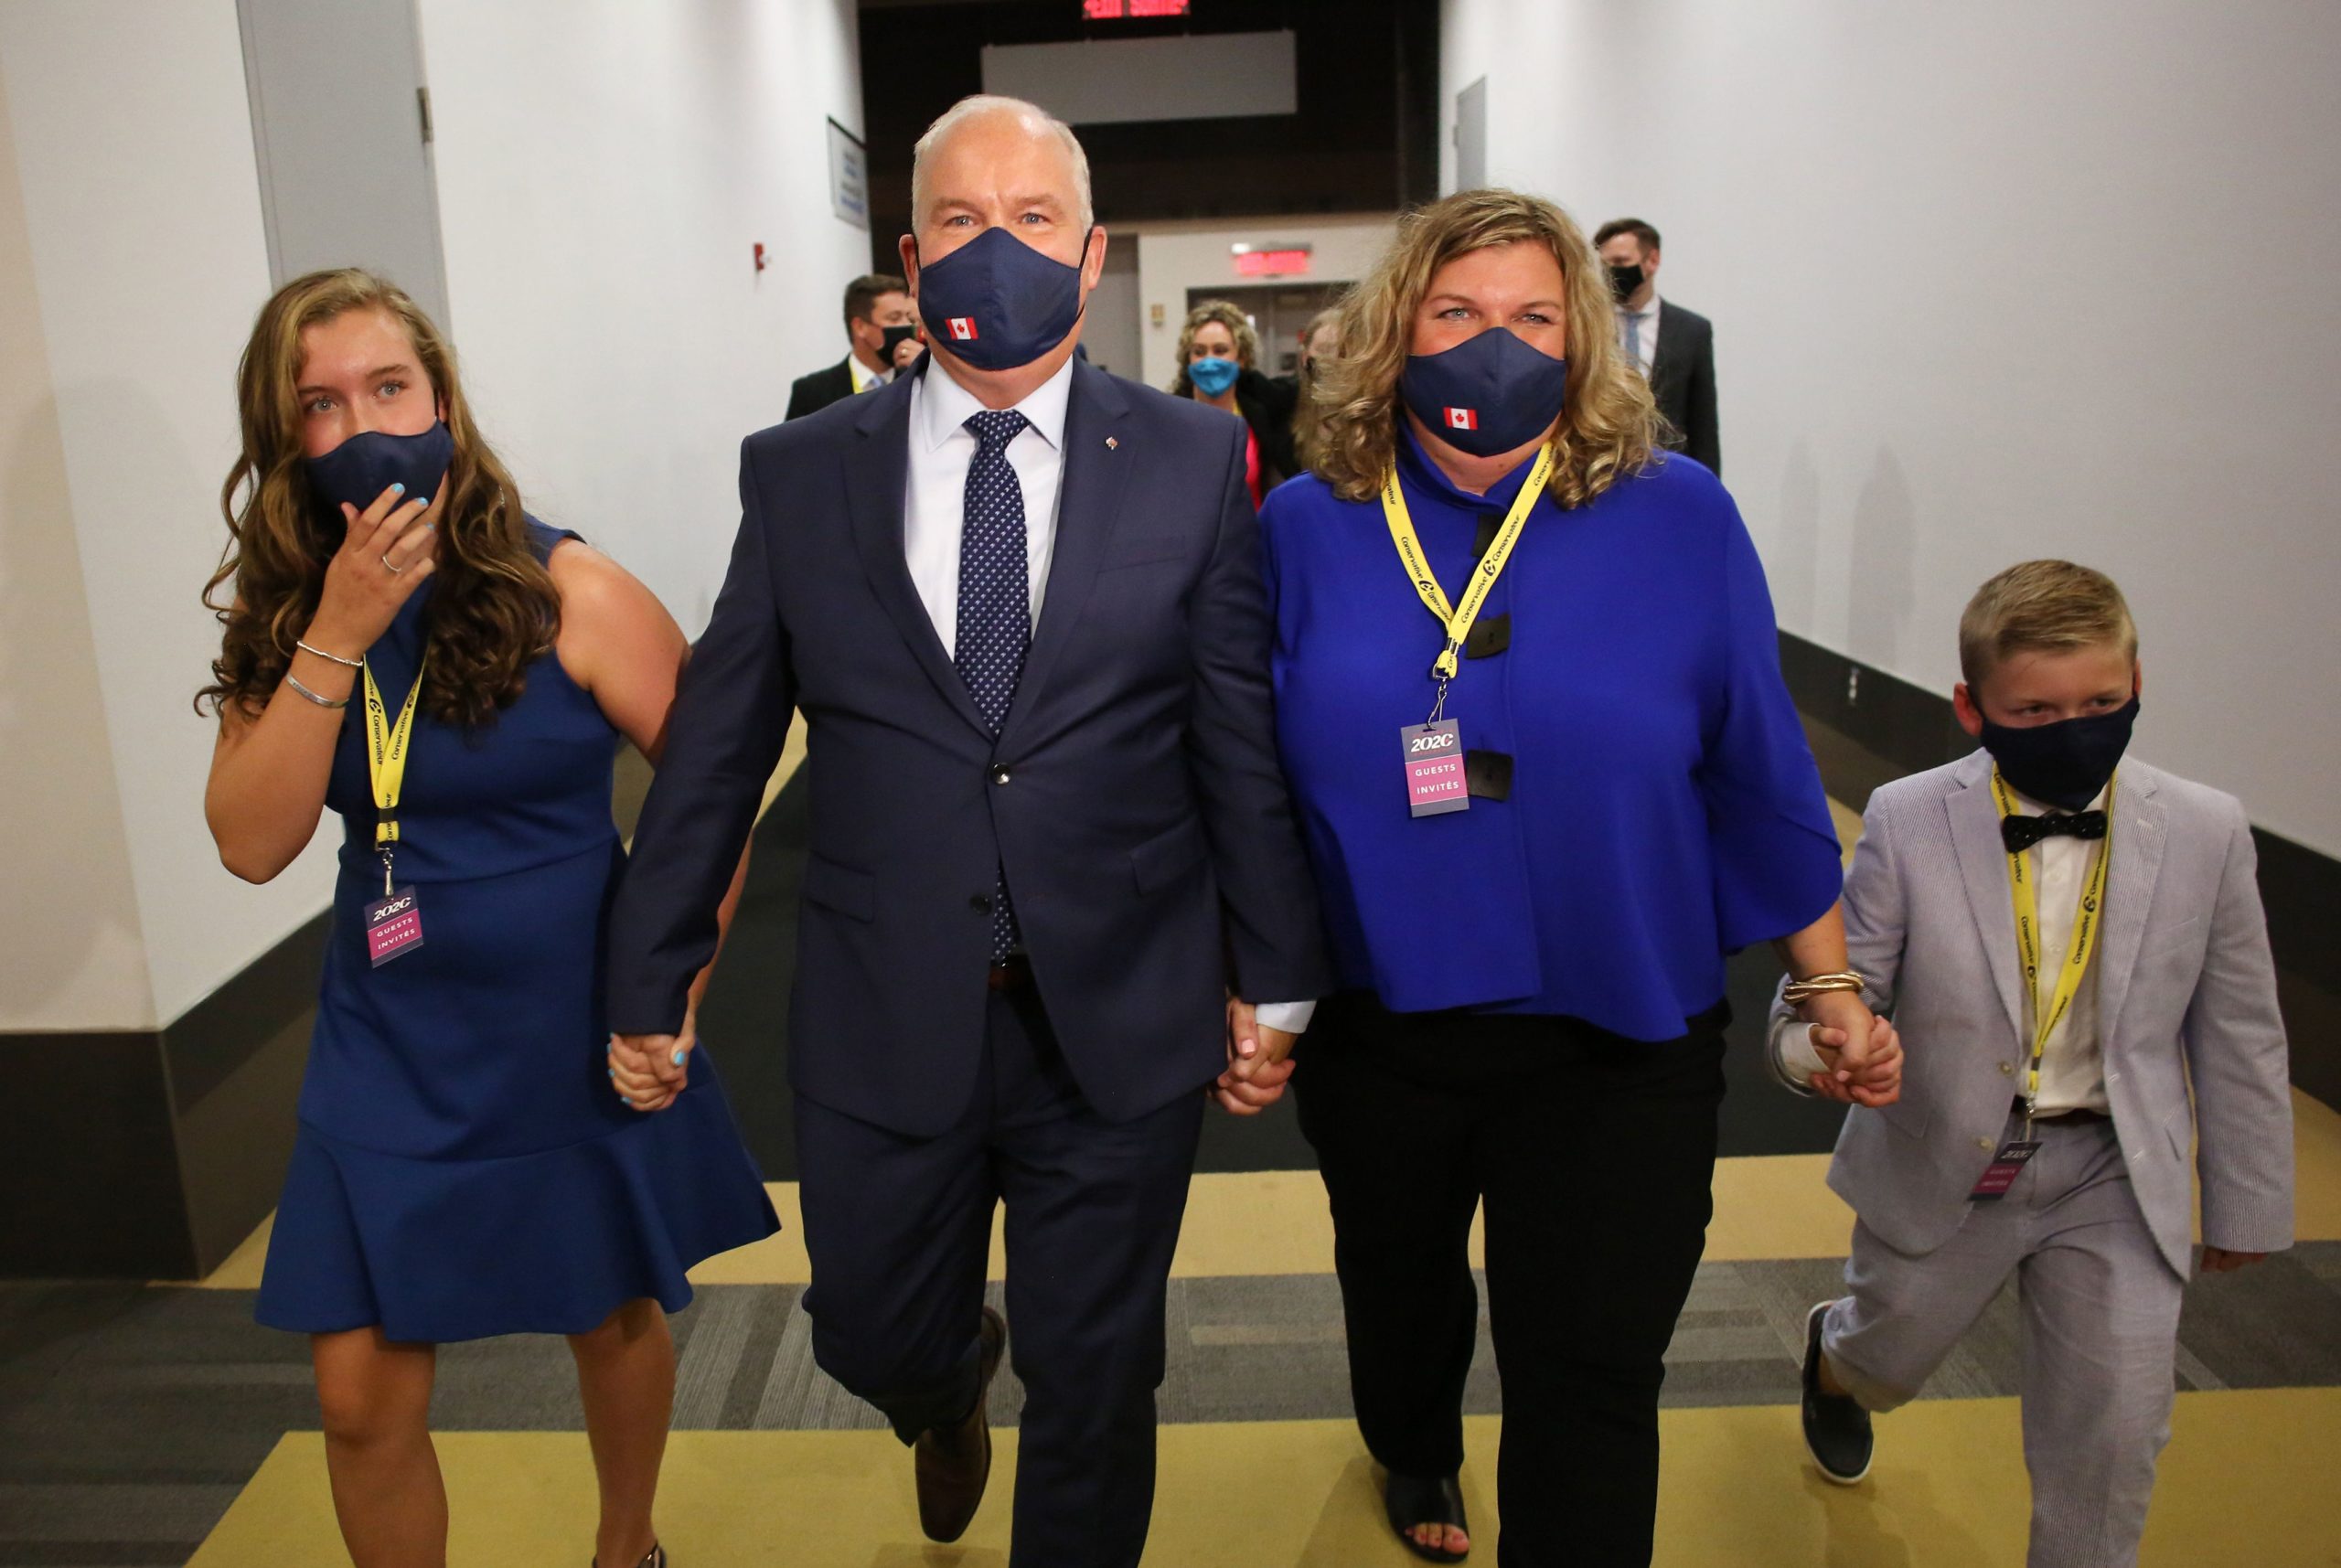 Newly elected Conservative Party of Canada leader Erin O'Toole (2nd L) arrives with his wife Rebecca (2nd R), daughter Mollie (L) and son Jack (R) to delivery his speech during the 2020 Leadership Election in Ottawa August 24, 2020. (Photo by Dave Chan / AFP) (Photo by DAVE CHAN/AFP via Getty Images)